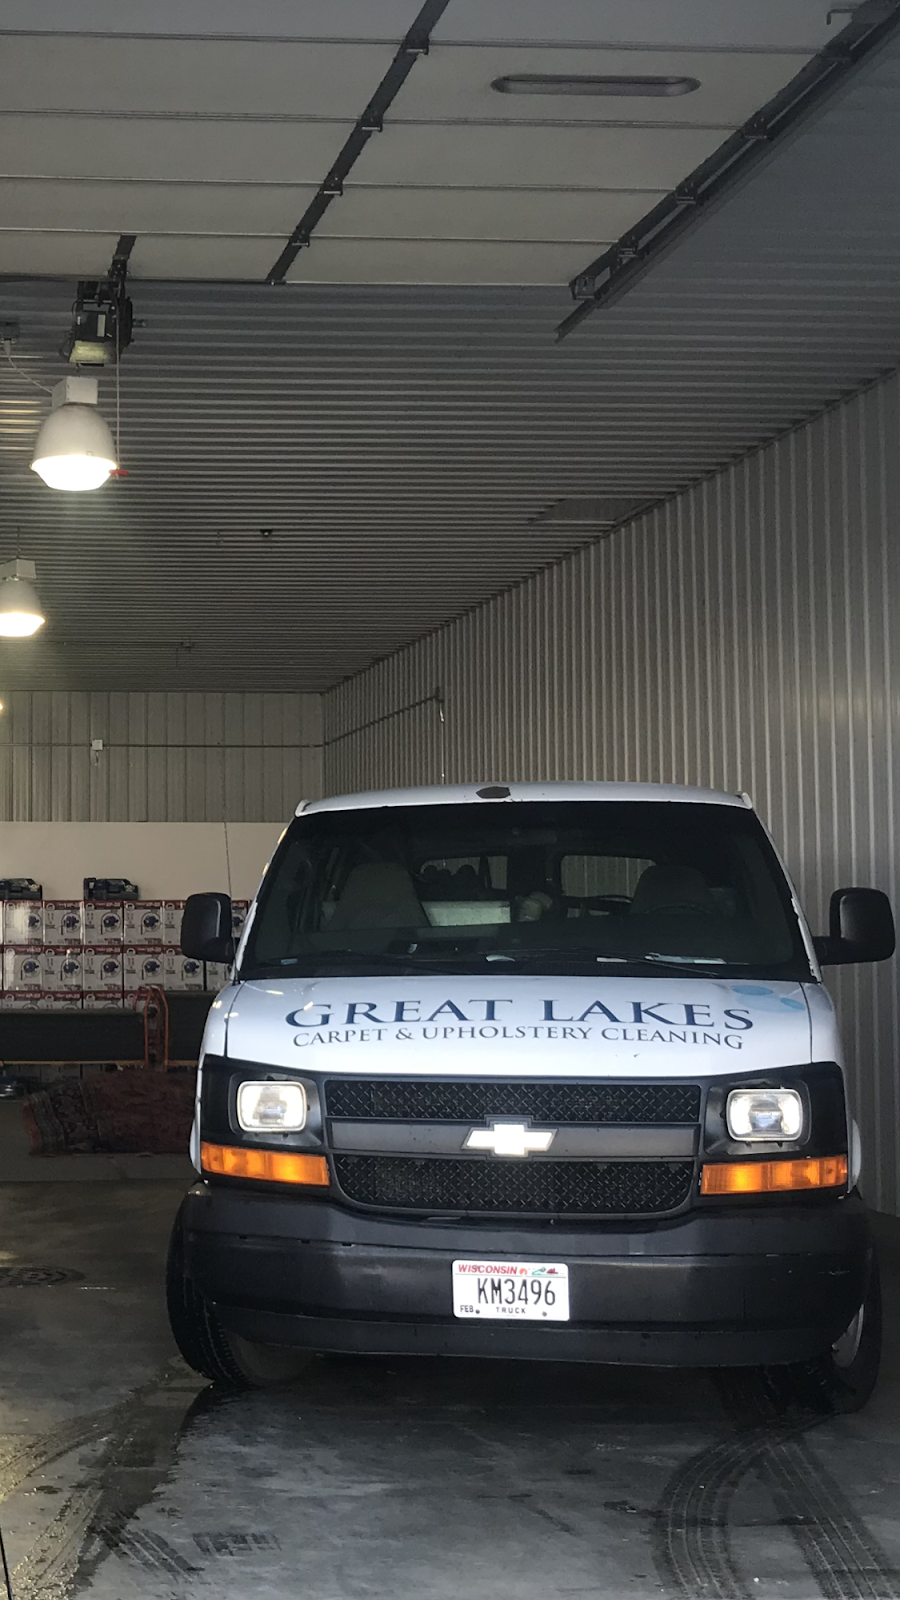 Great Lakes Carpet & Upholstery Cleaning LLC - North | W166S7133 Still Meadow Ct, Muskego, WI 53150, USA | Phone: (262) 844-0528